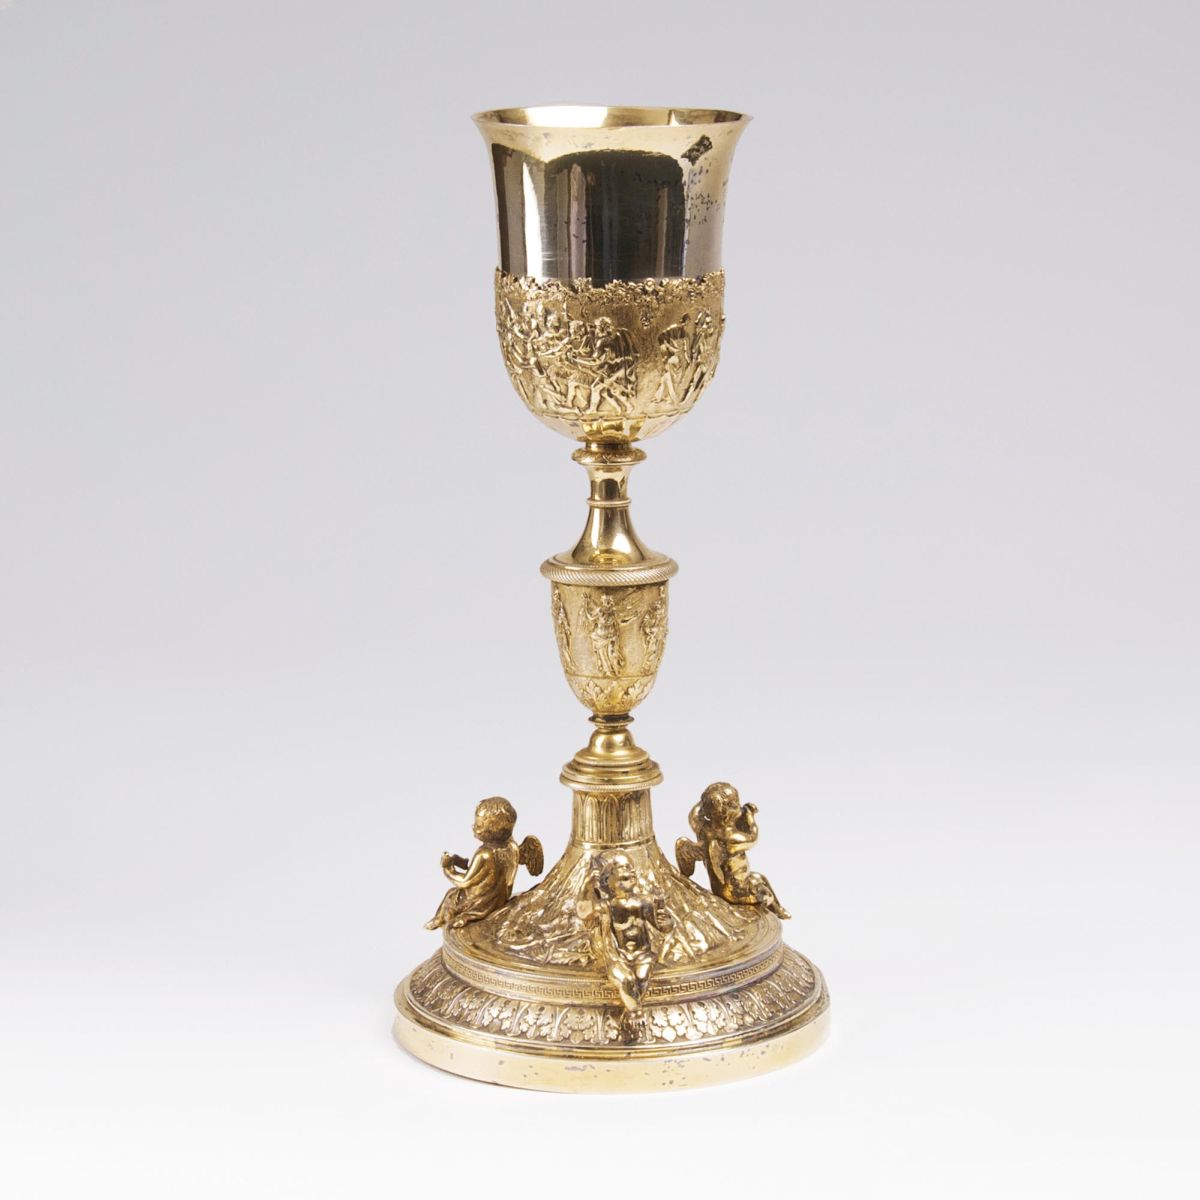 A Roman Chalice with Presantation of the Passion of Christ